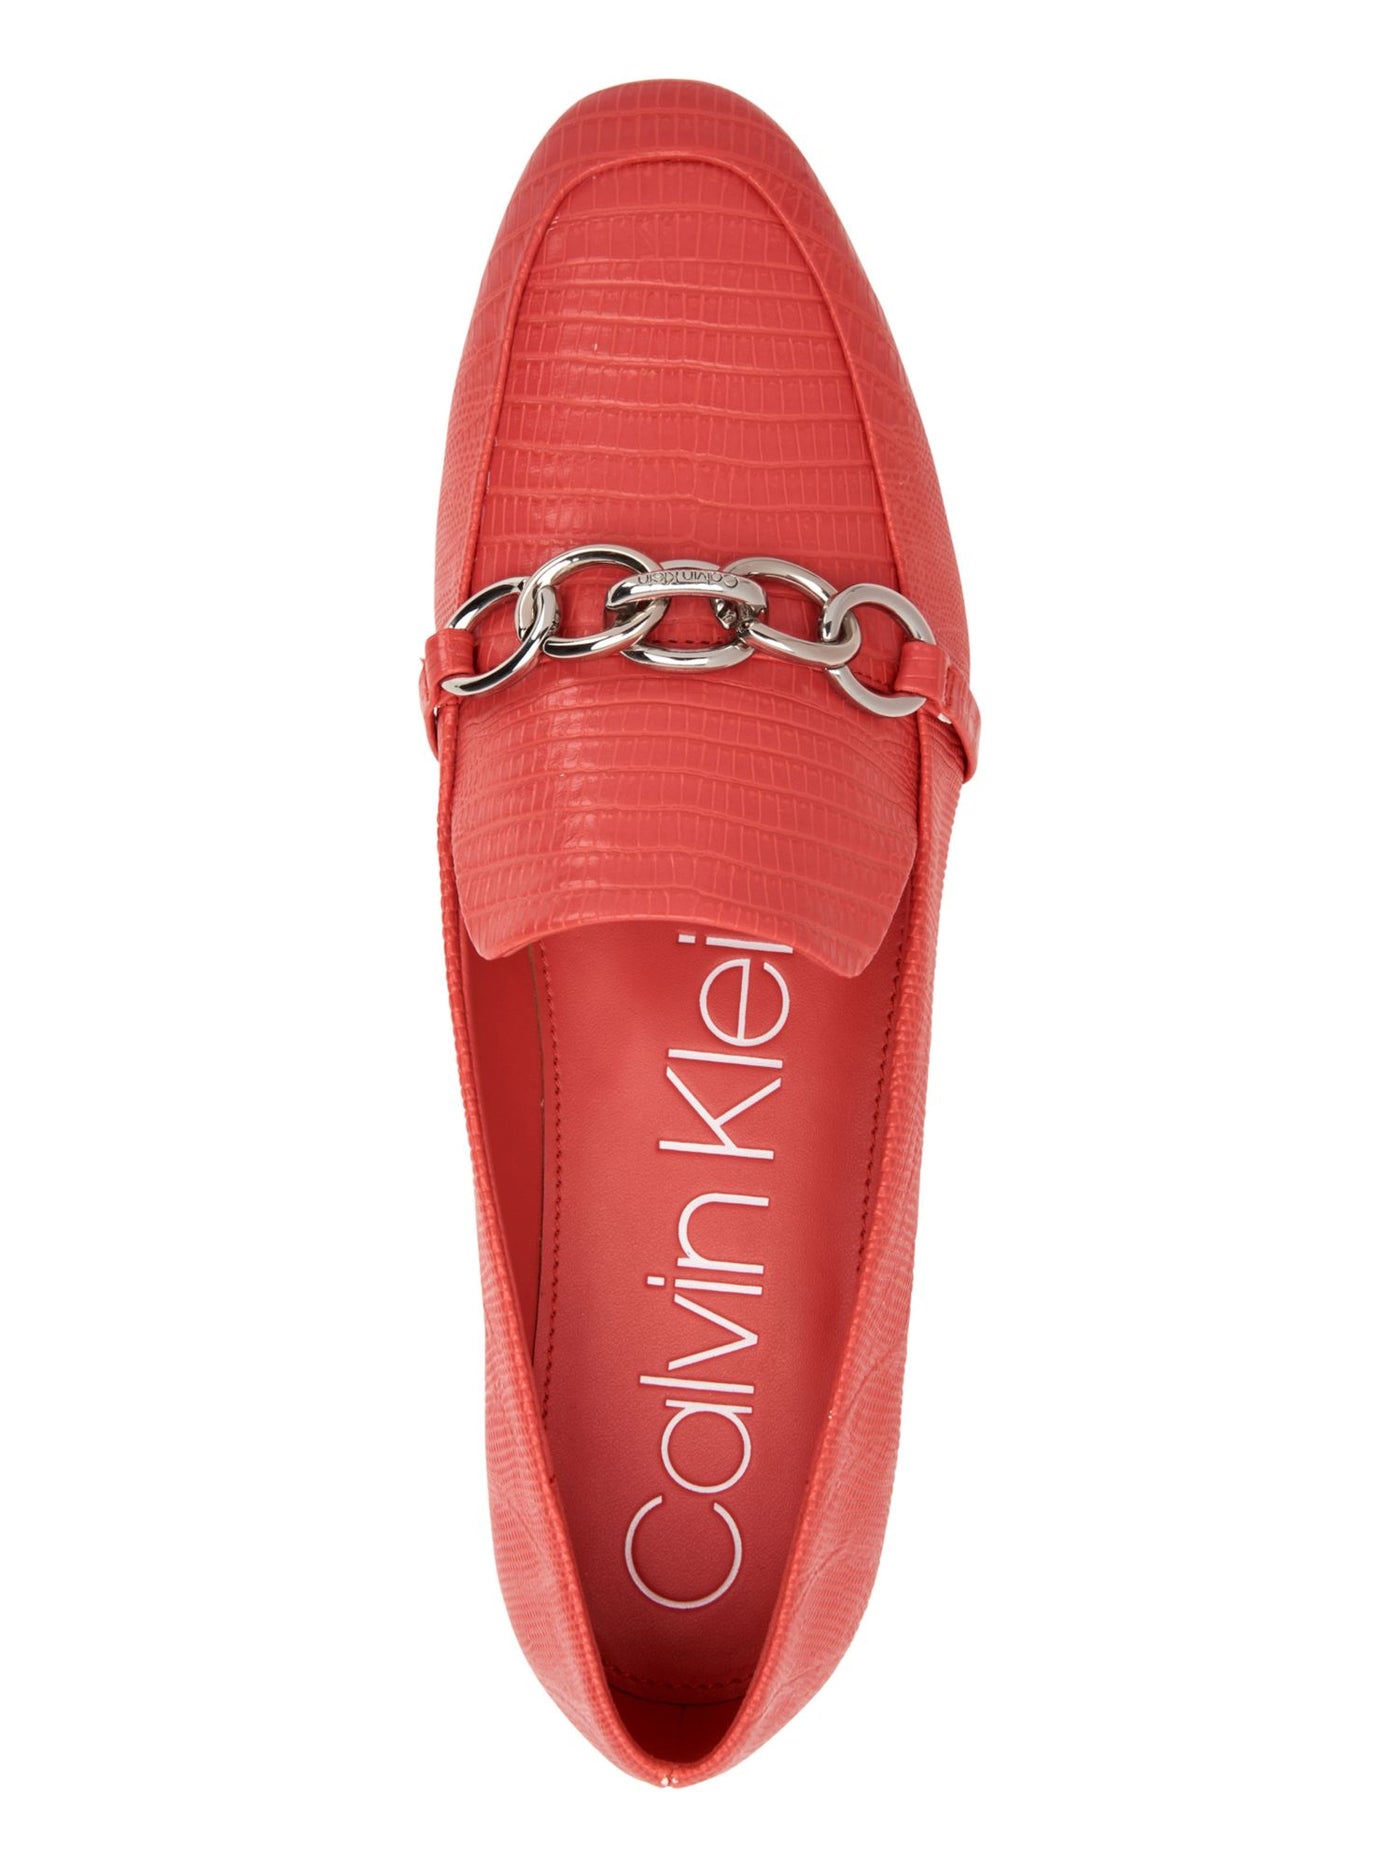 CALVIN KLEIN Womens Pink Signature Chain Link Cushioned Logo Banda Round Toe Slip On Loafers Shoes 9 M